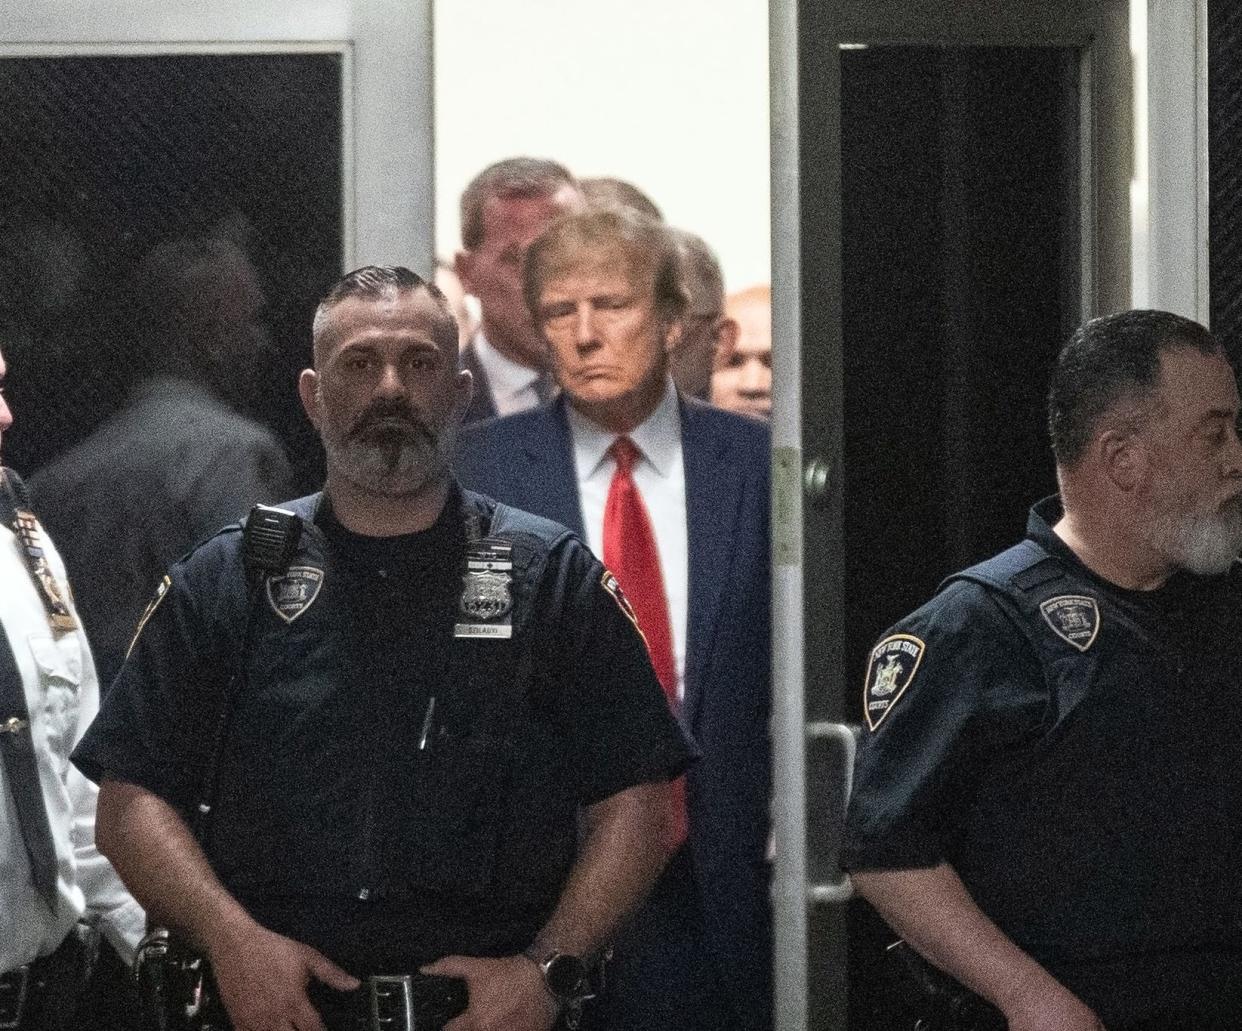 Former President Donald Trump in court for his arraignment on April 4, 2023.